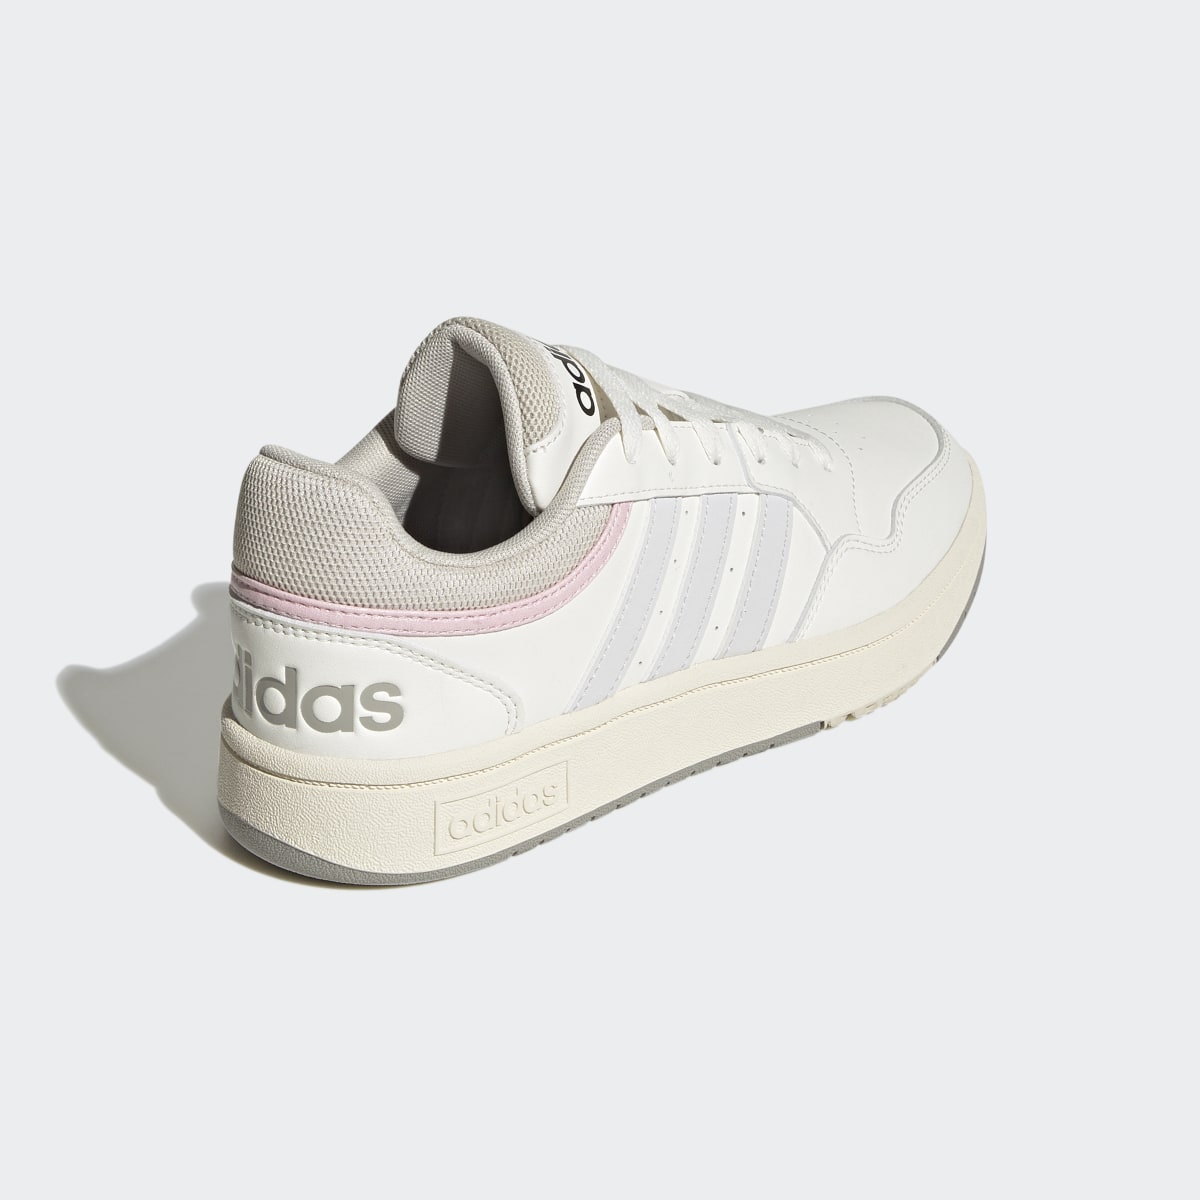 Adidas Hoops 3.0 Mid Lifestyle Basketball Low Shoes. 6